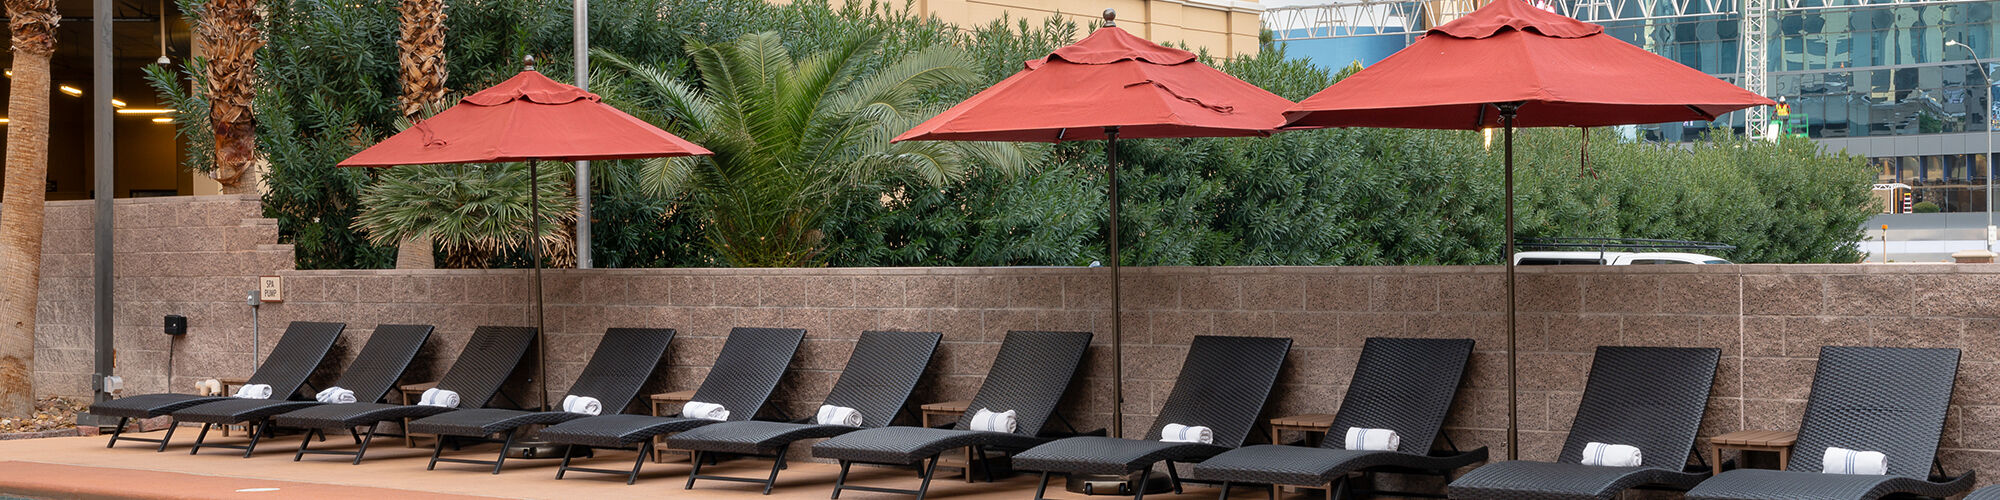 A poolside area with lounge chairs and red umbrellas, adjacent to a parking structure and surrounded by greenery.